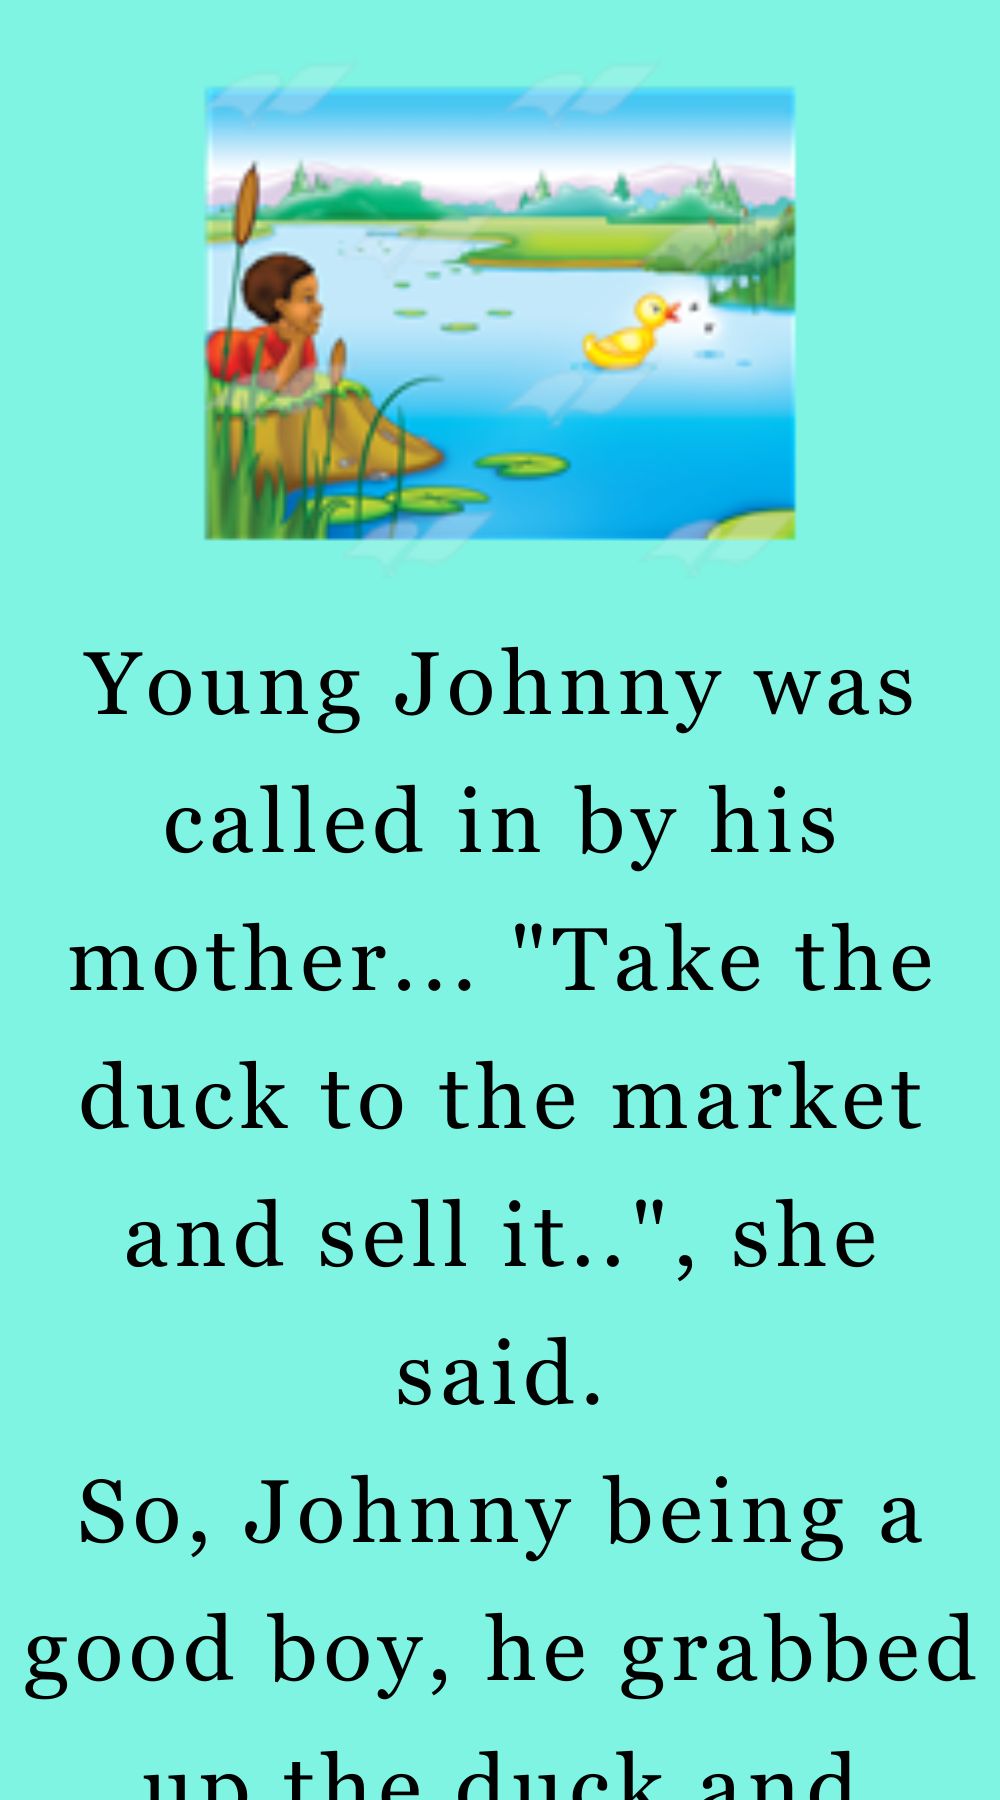 Johnny was called in by his mother